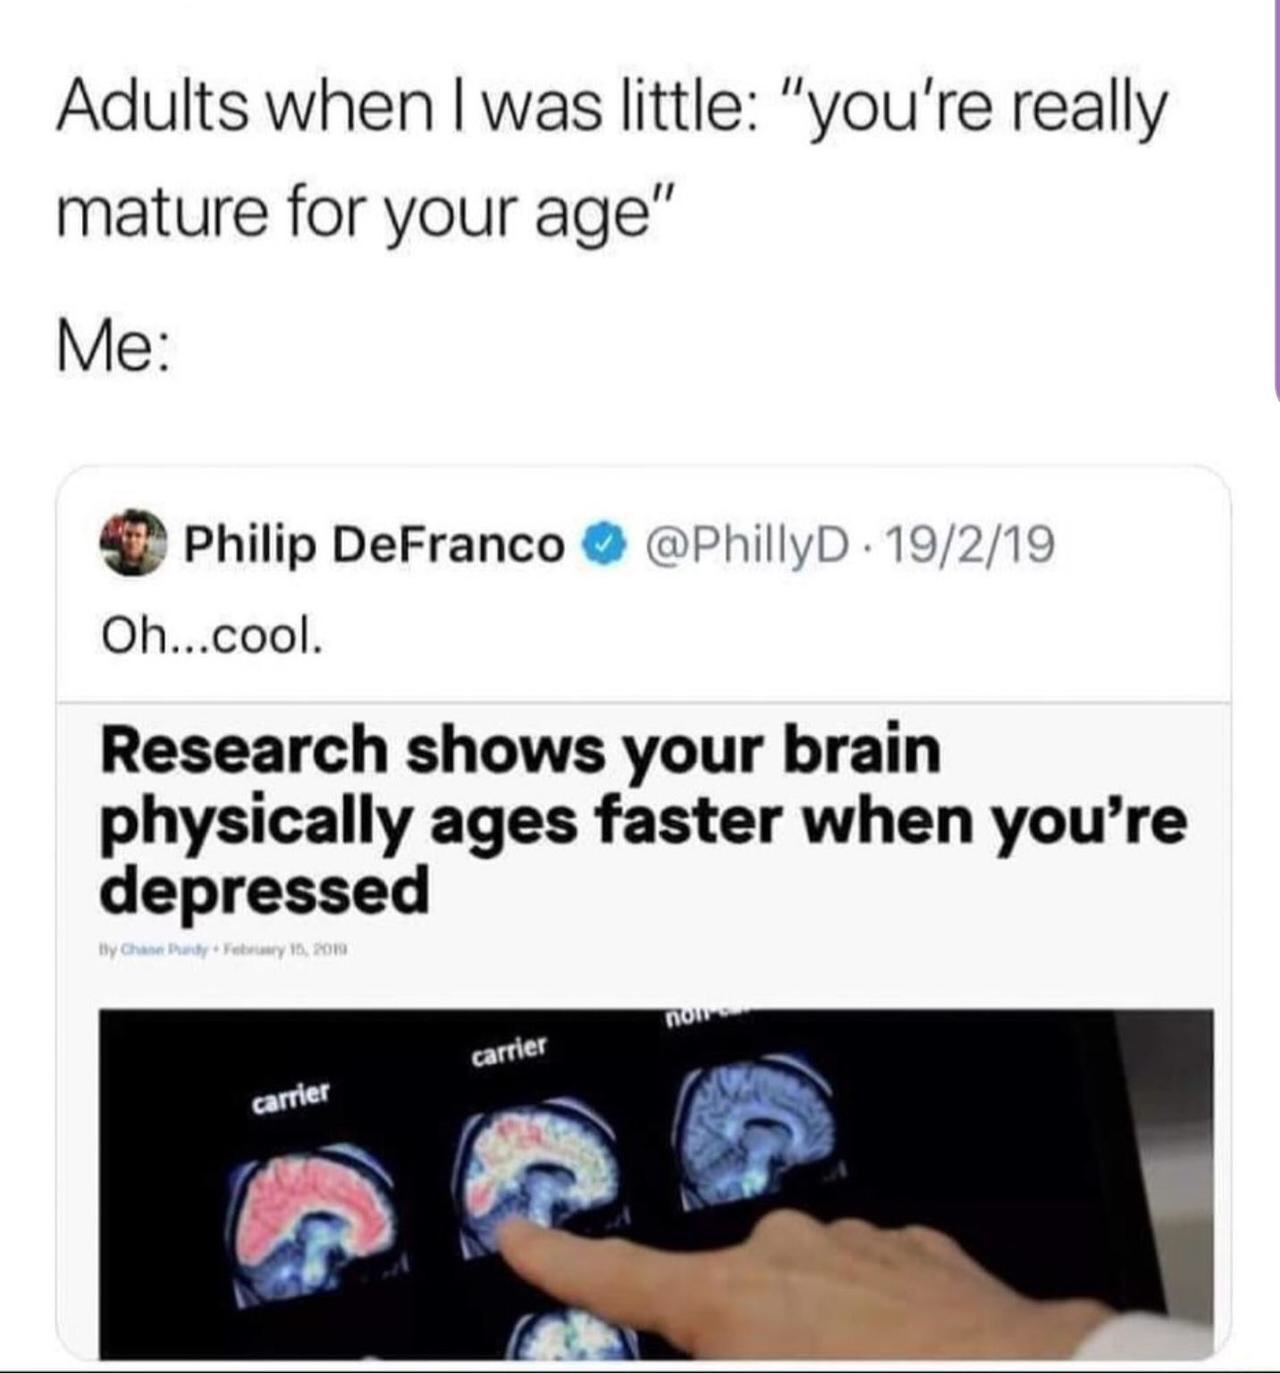 your brain ages faster when you re depressed - Adults when I was little "you're really mature for your age" Me Philip DeFranco . 19219 Oh...cool Research shows your brain physically ages faster when you're depressed By Chandy Fry 15, 2019 non carrier carr